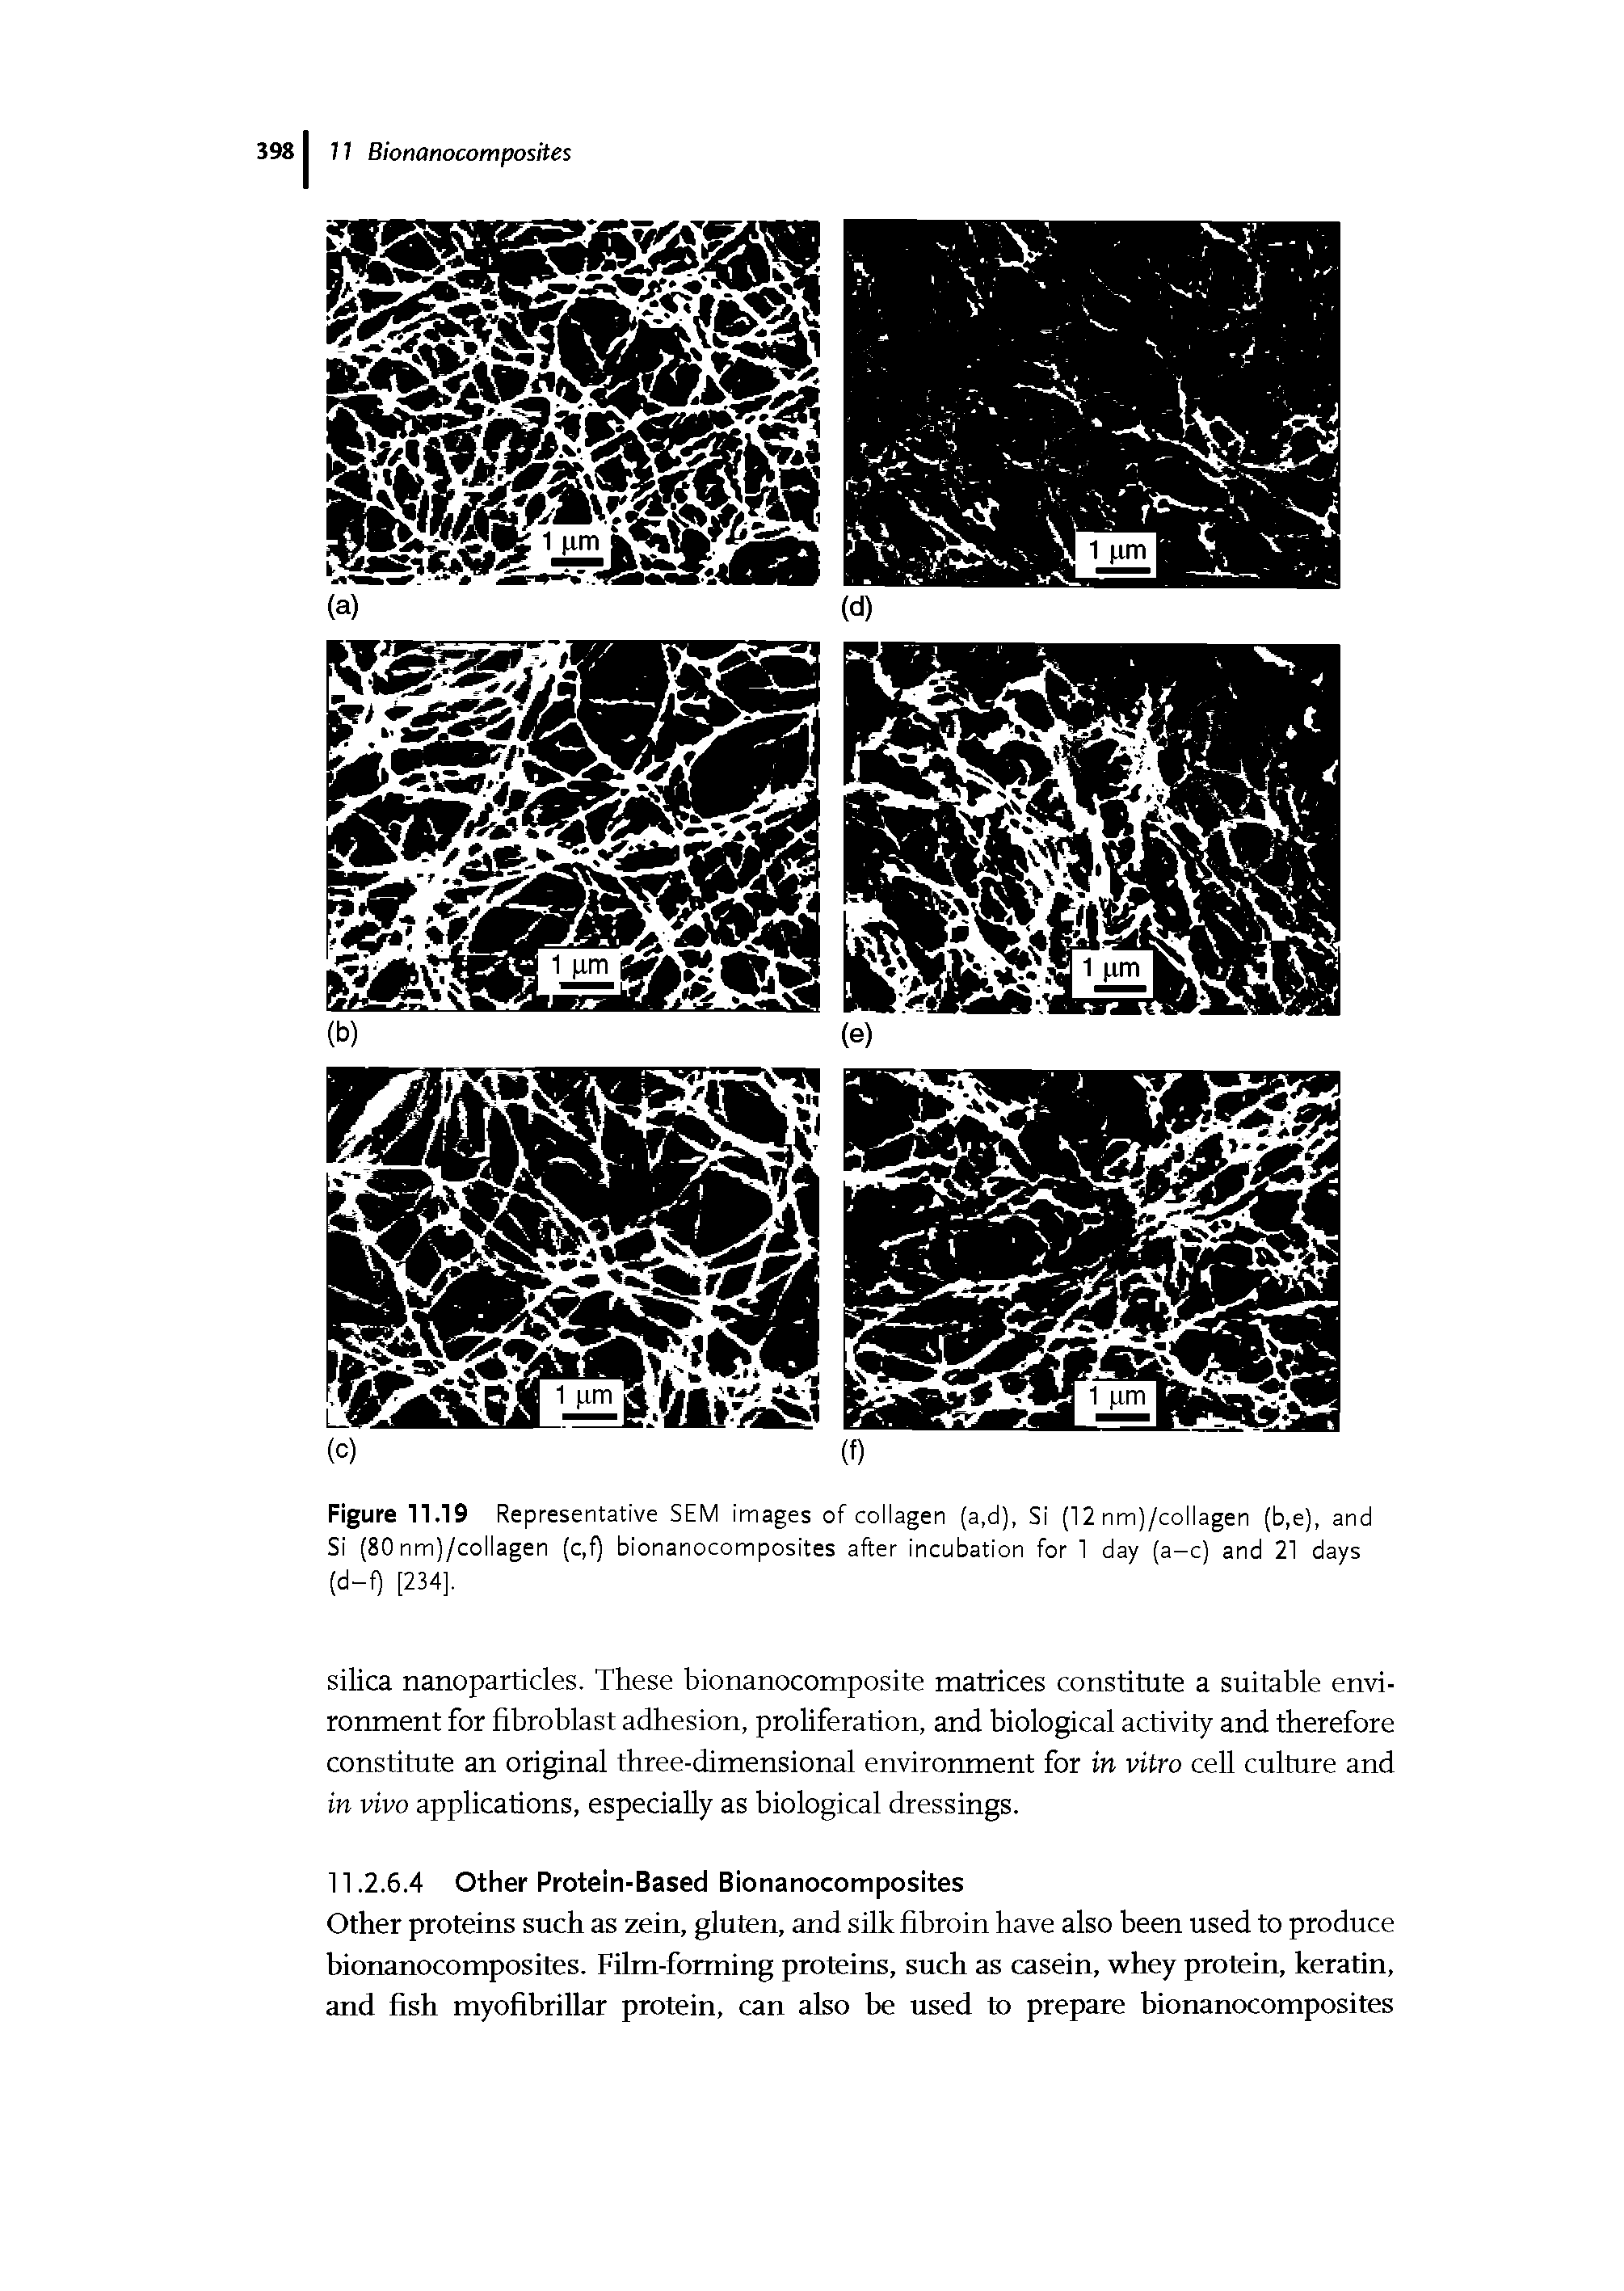 Figure 11.19 Representative SEM images of collagen (a,d), Si (12 nm)/collagen (b,e), and Si (80nm)/collagen (c,f) bionanocomposites after incubation for 1 day (a-c) and 21 days (d-f) [234],...